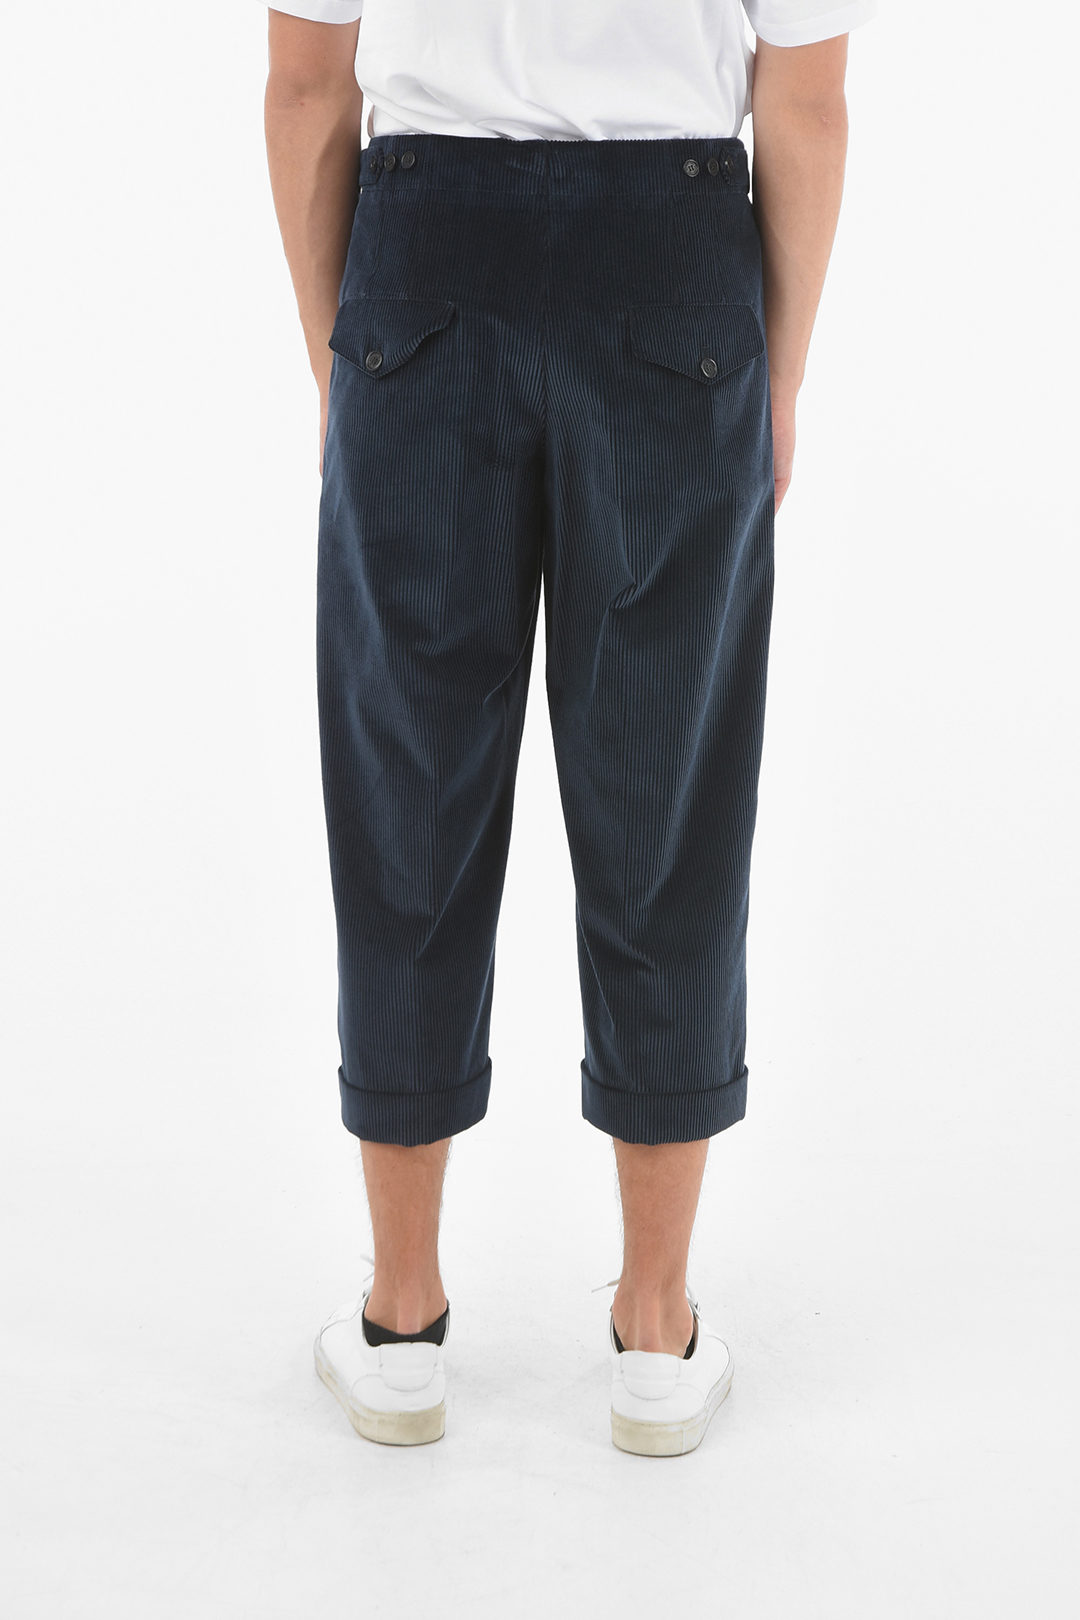 Neil Barrett Ribbed Velour Pants with Cuffed Ankles men - Glamood Outlet